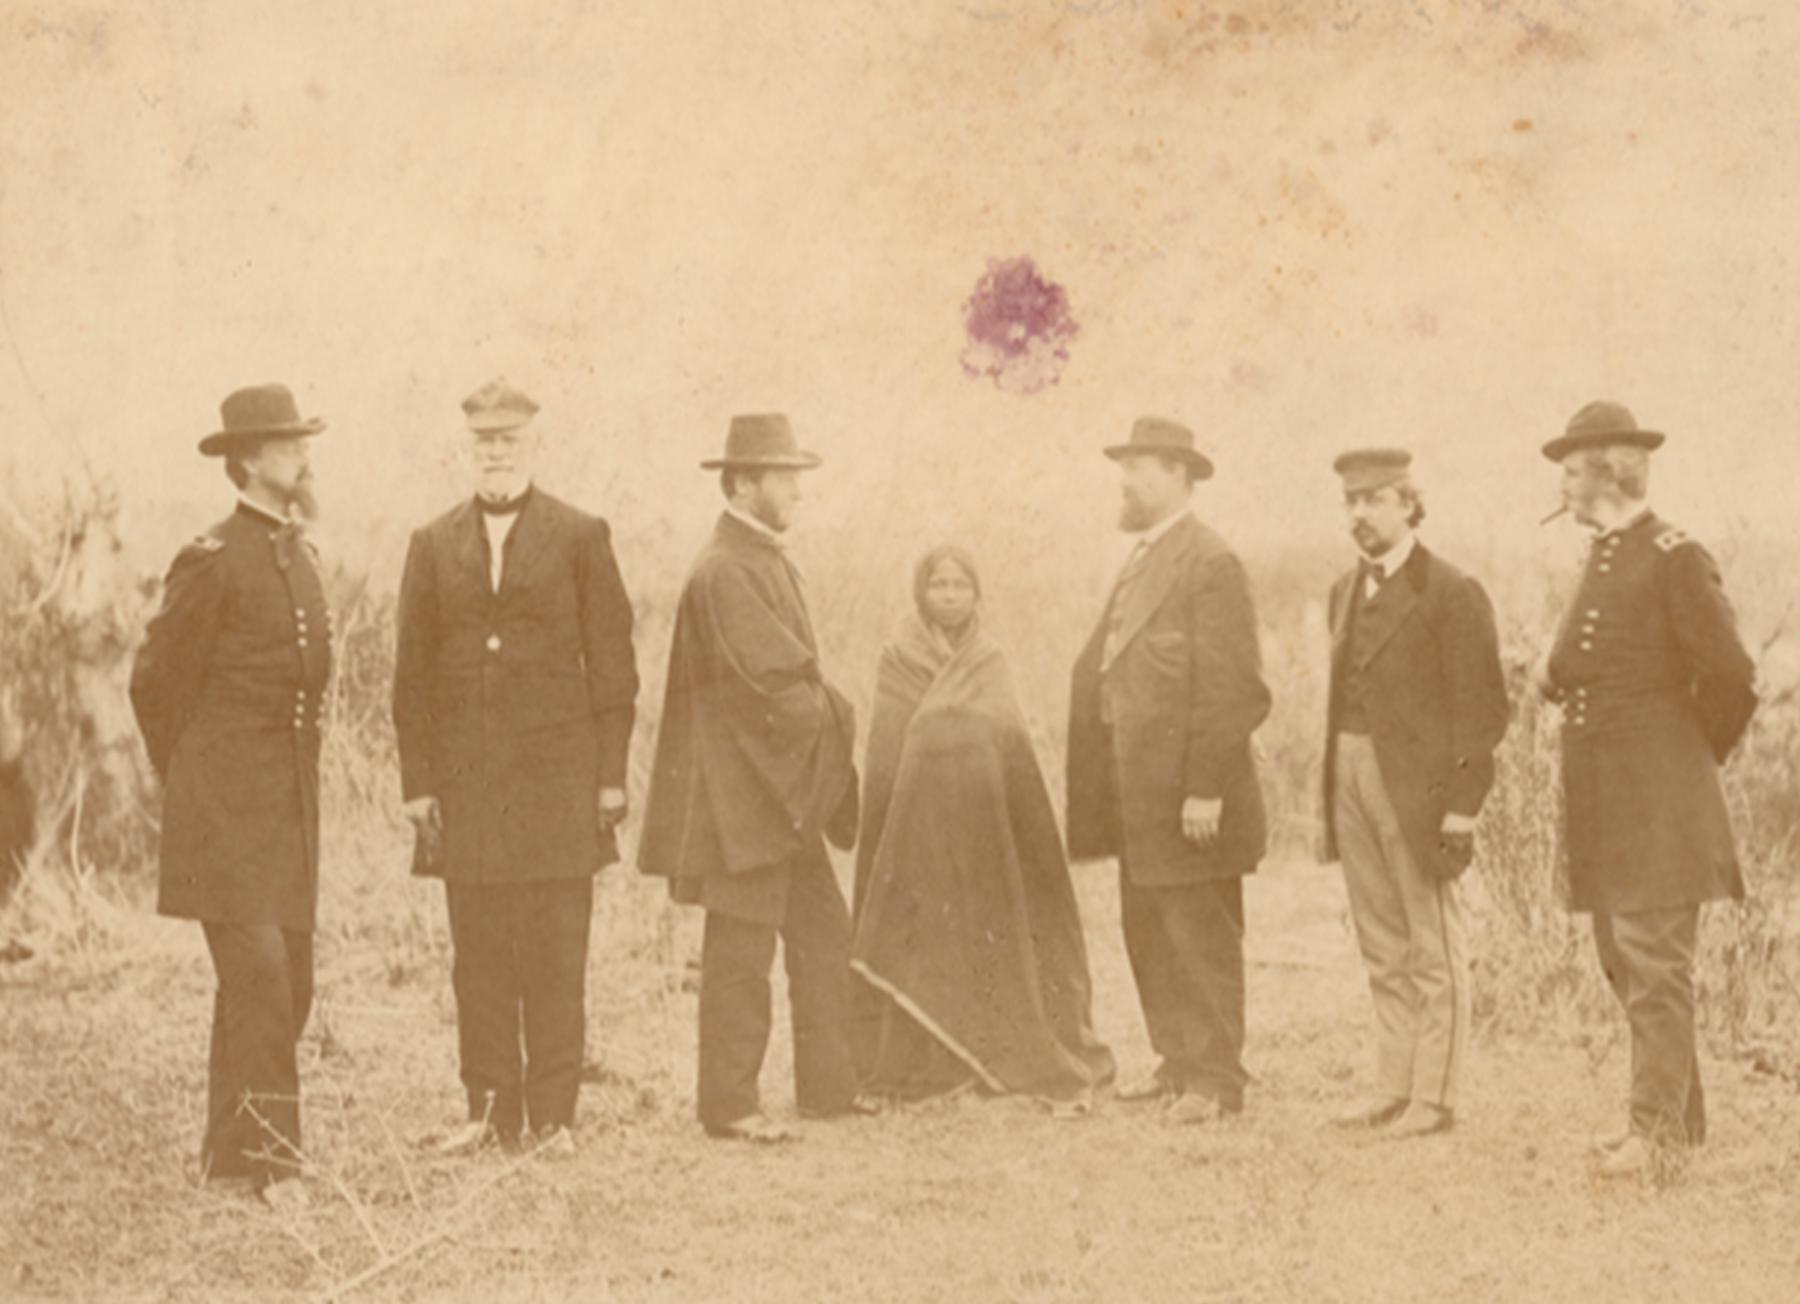 Commissioners at Fort Laramie for the 1868 treaty signing. From left to right Gen. Alfred Howe Terry, Gen. William S. Harney, General William Tecumseh Sherman, Sophie Mosseau, John B. Sanborn, Col. Samuel F. Tappan, and Gen. Christopher C. Augur. Sophie Mosseau was the daughter of a Lakota mother and French-speaking trapper. She later married Wyoming settler John “Posey” Ryan. Sherman collection of Gardner photographs; NMAI.